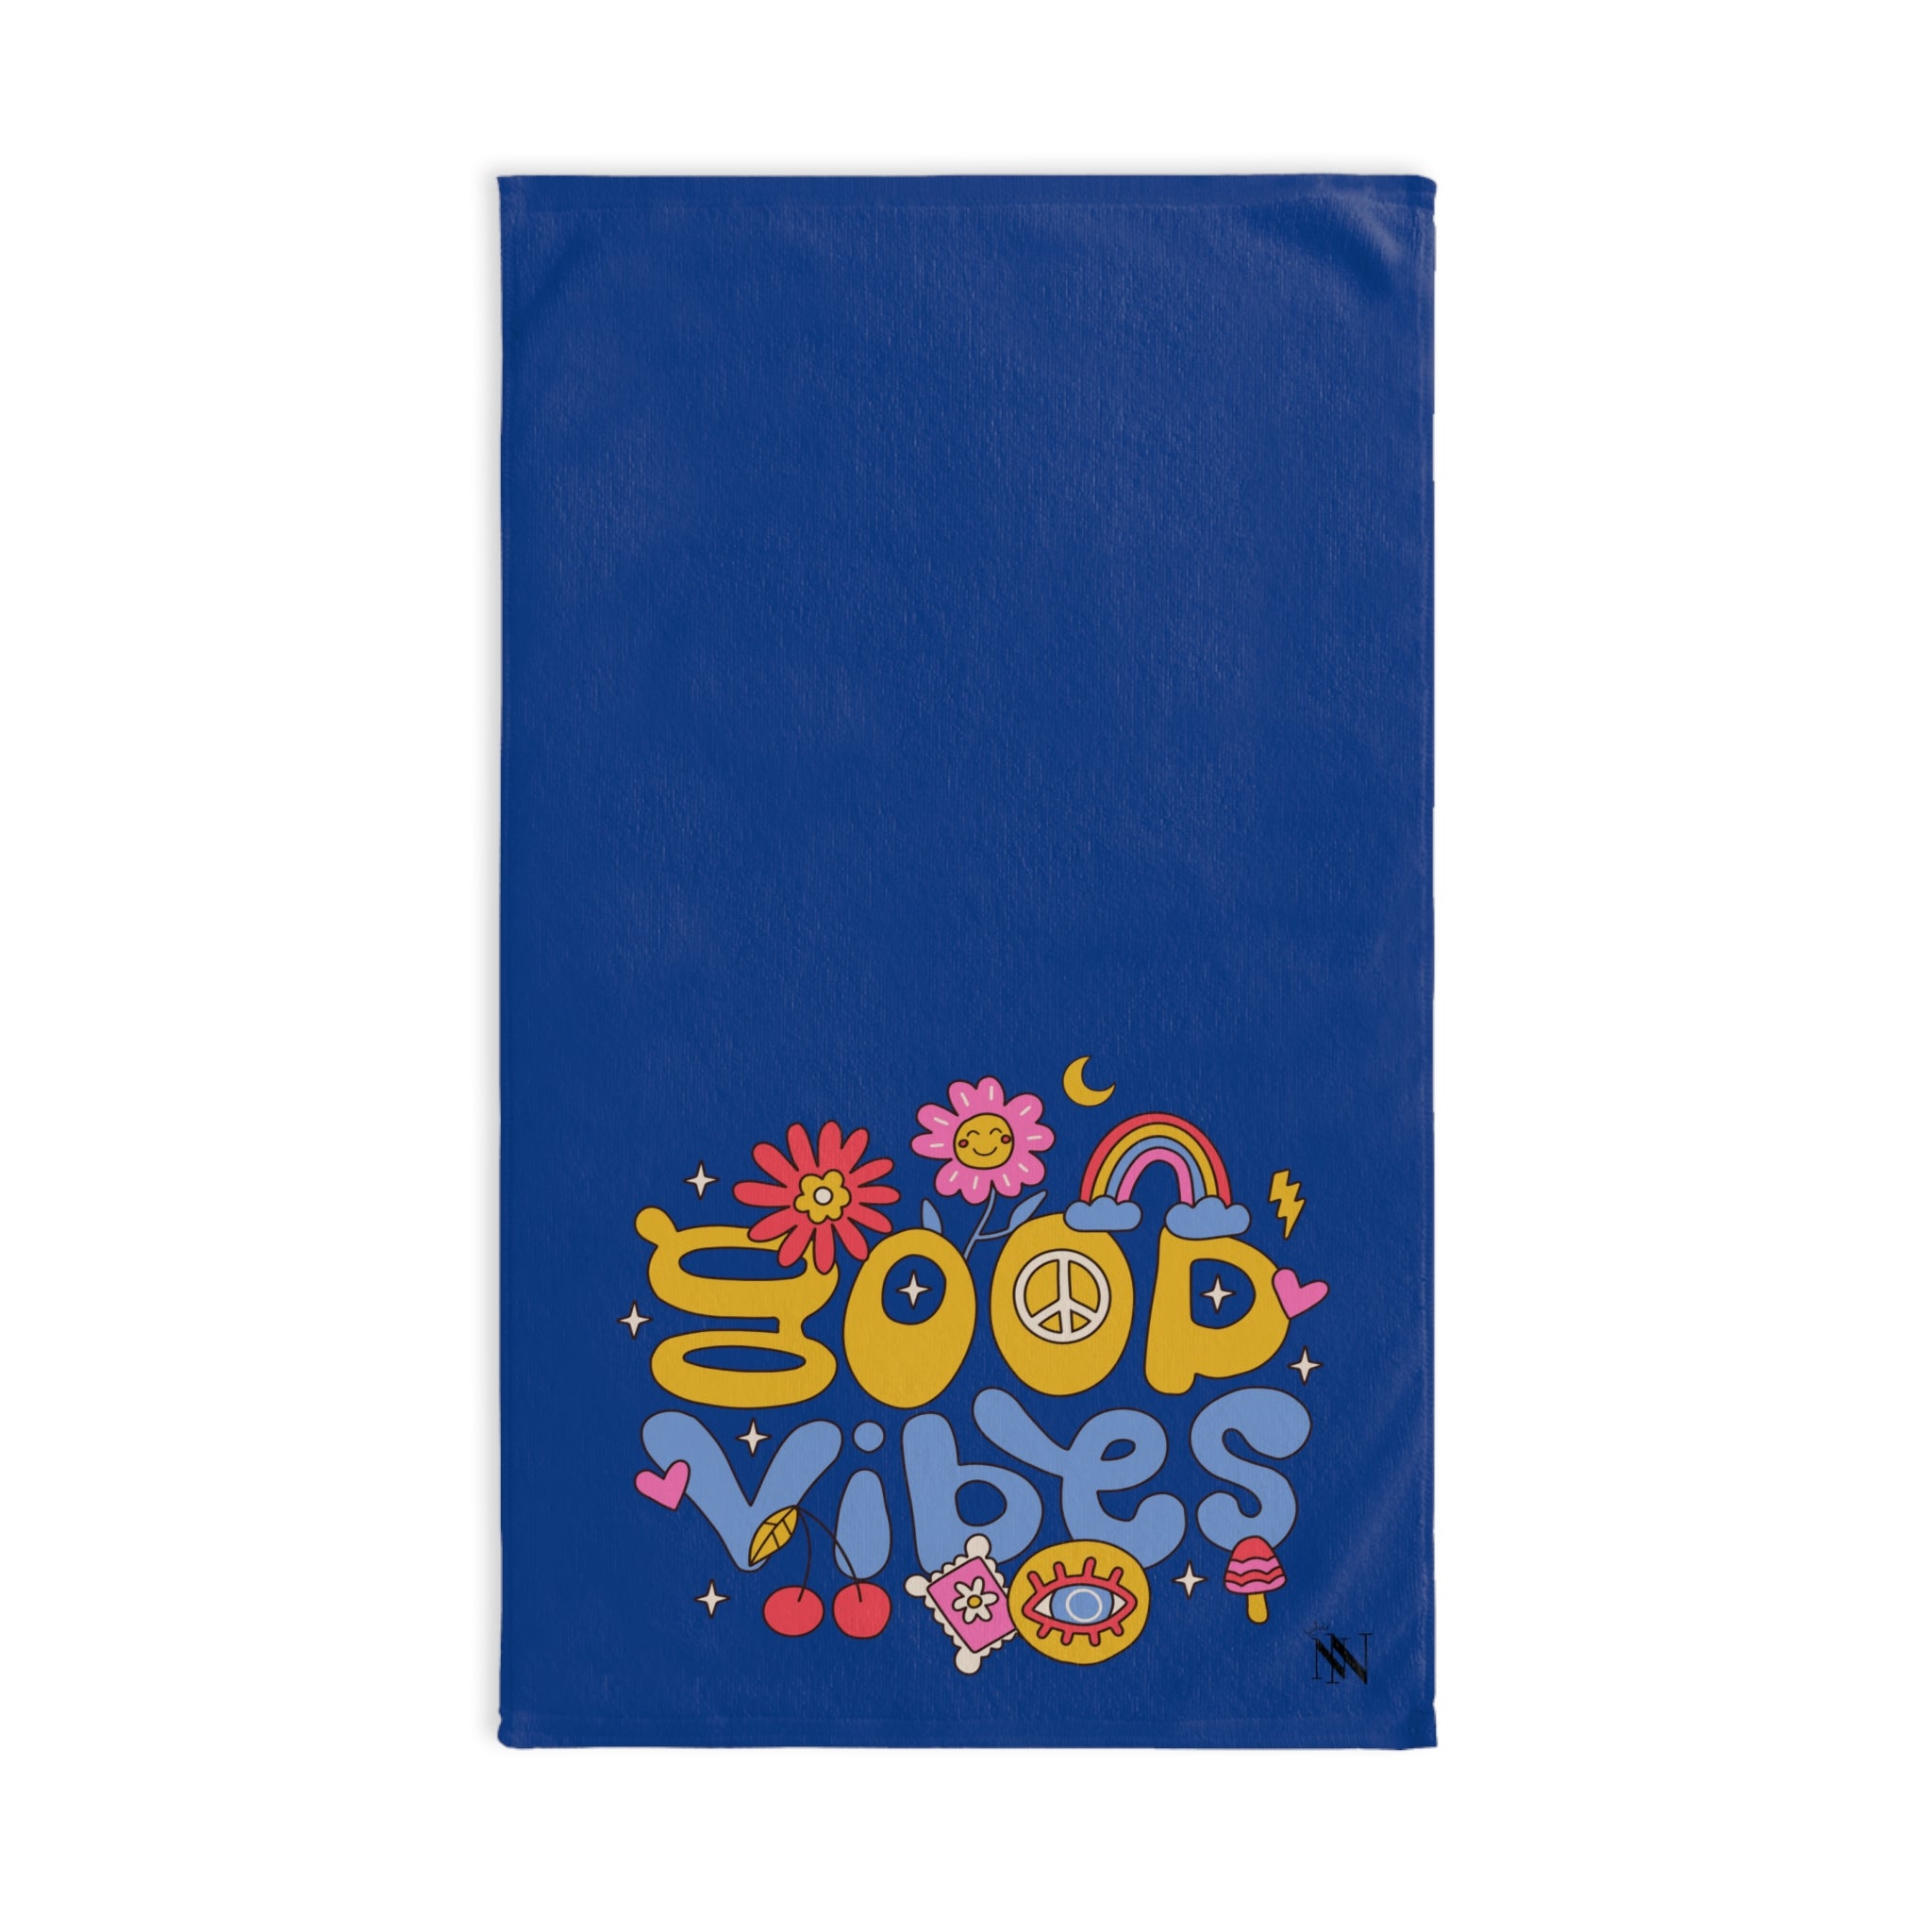 Hippie Vibes Good Blue | Gifts for Boyfriend, Funny Towel Romantic Gift for Wedding Couple Fiance First Year Anniversary Valentines, Party Gag Gifts, Joke Humor Cloth for Husband Men BF NECTAR NAPKINS